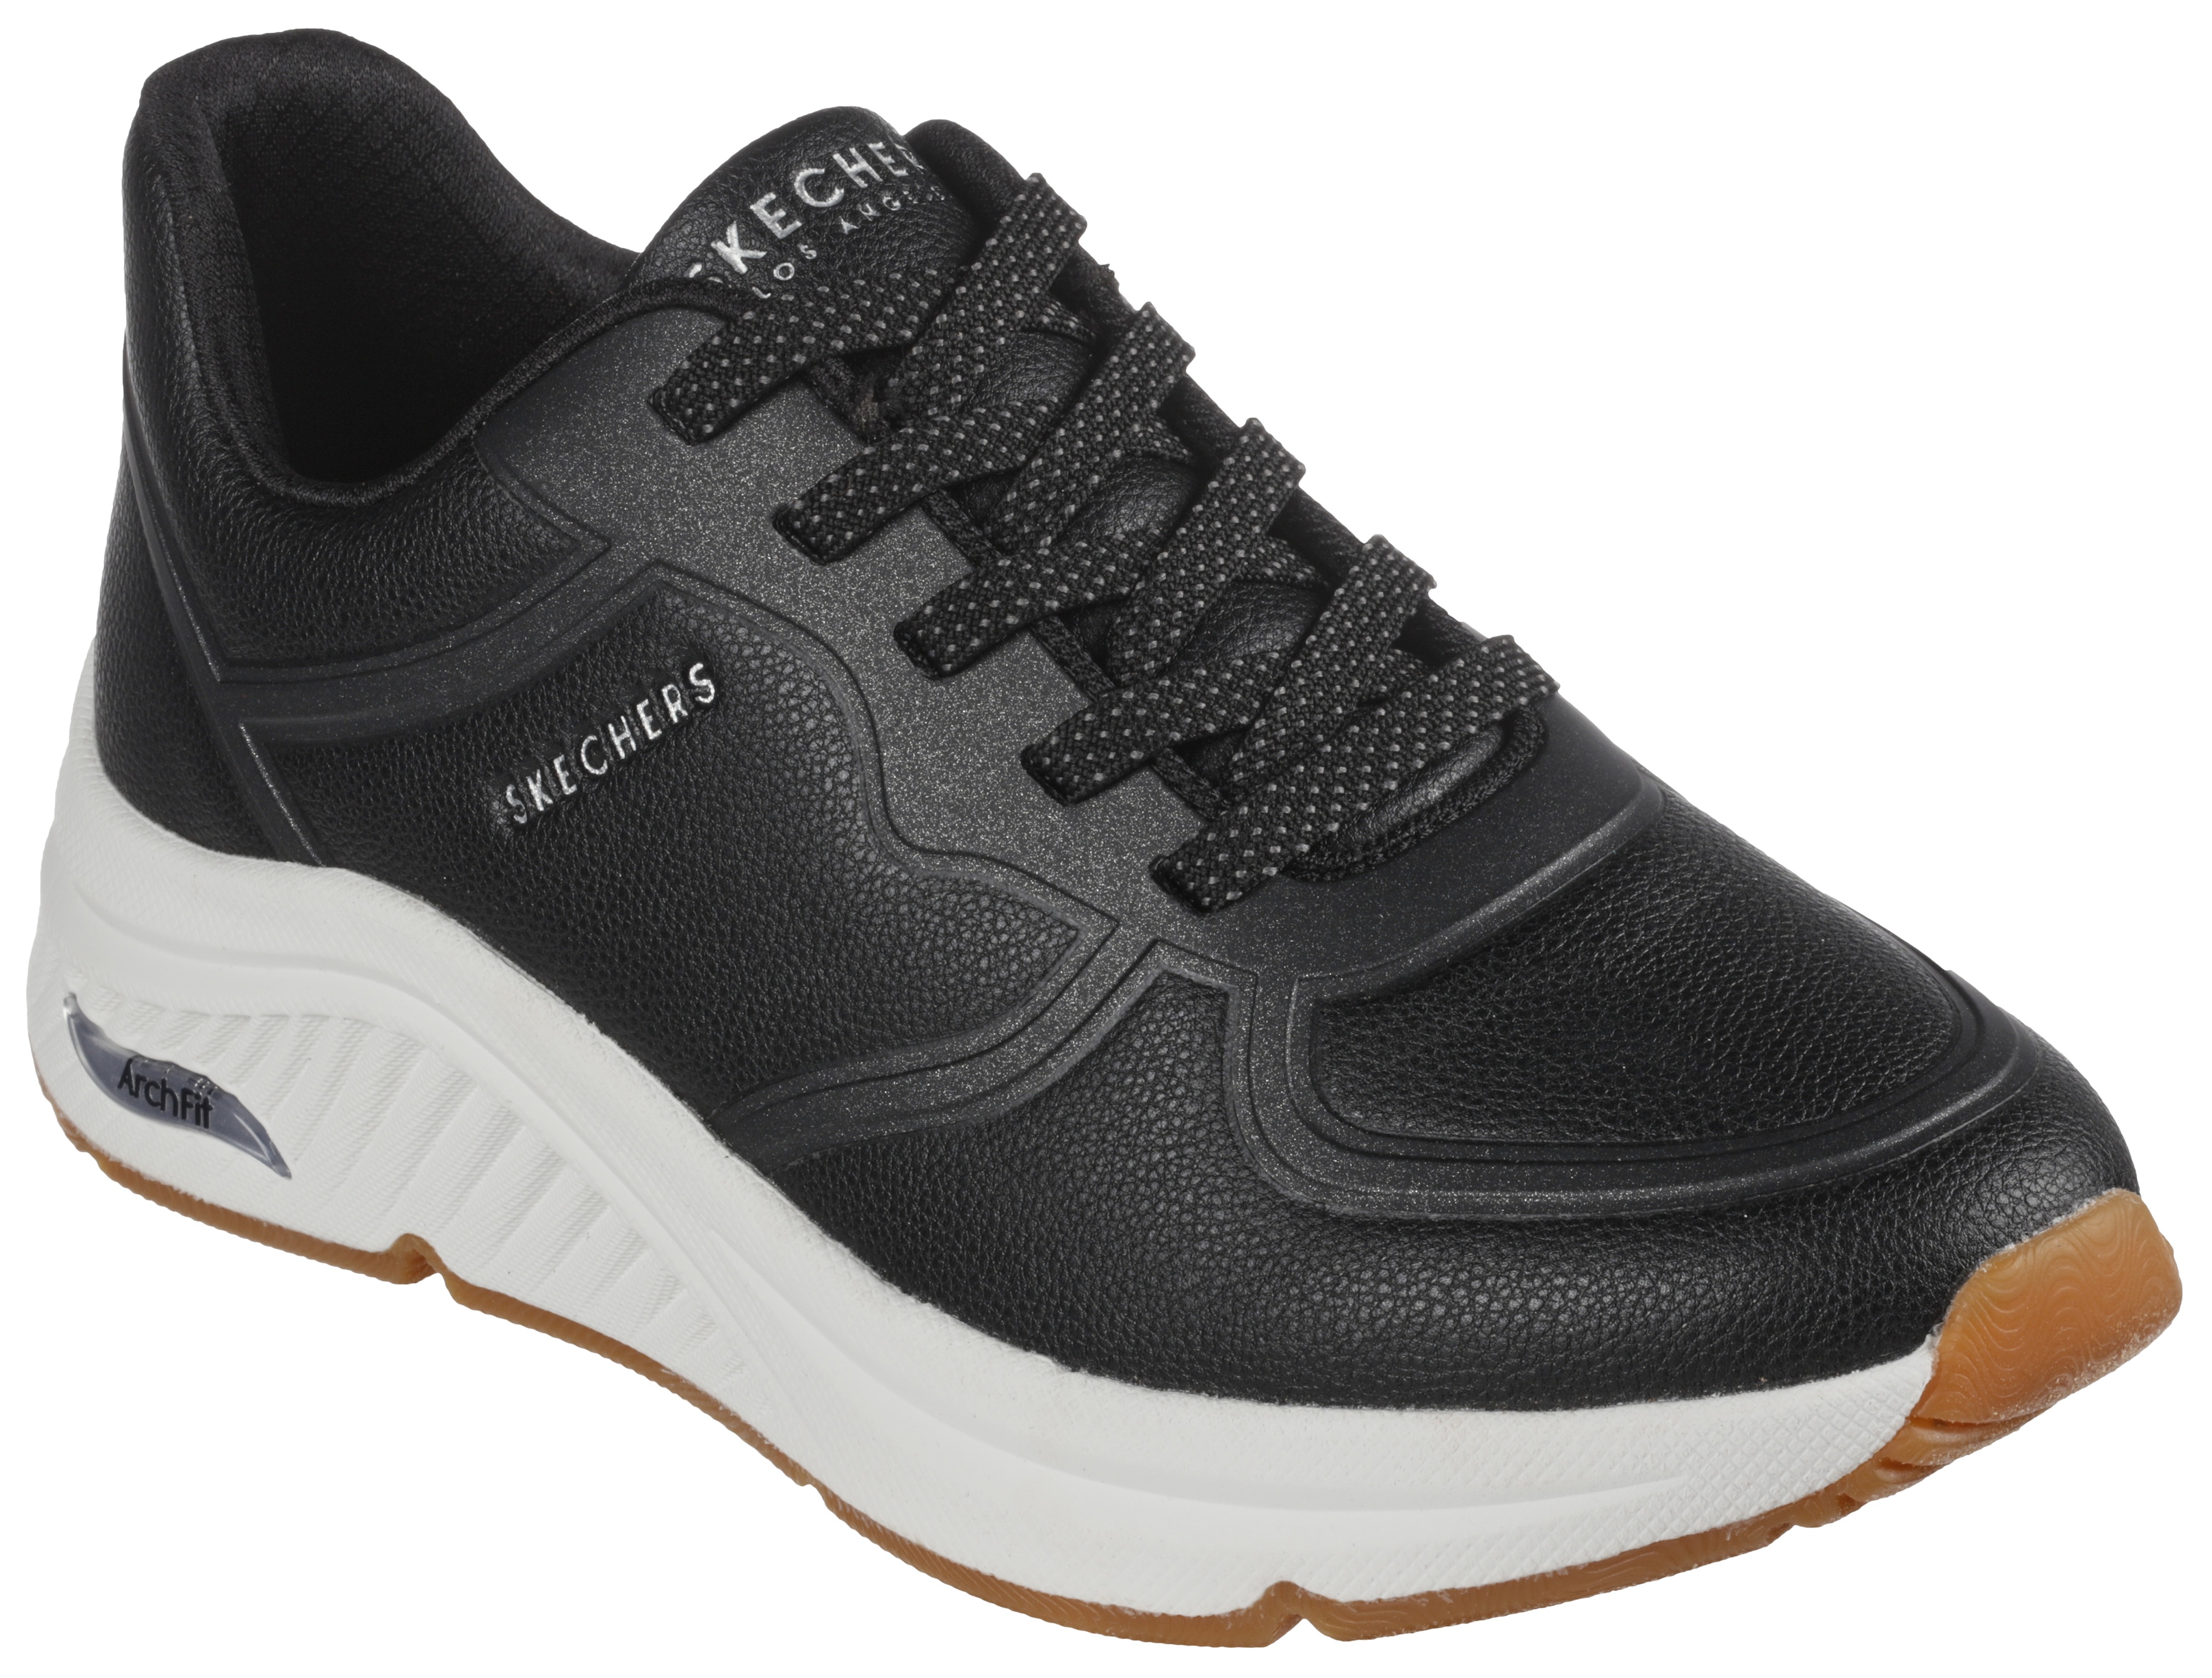 Skechers Sneaker »ARCH FIT S-MILES MILE MAKERS«, mit Arch Fit Ausstattung